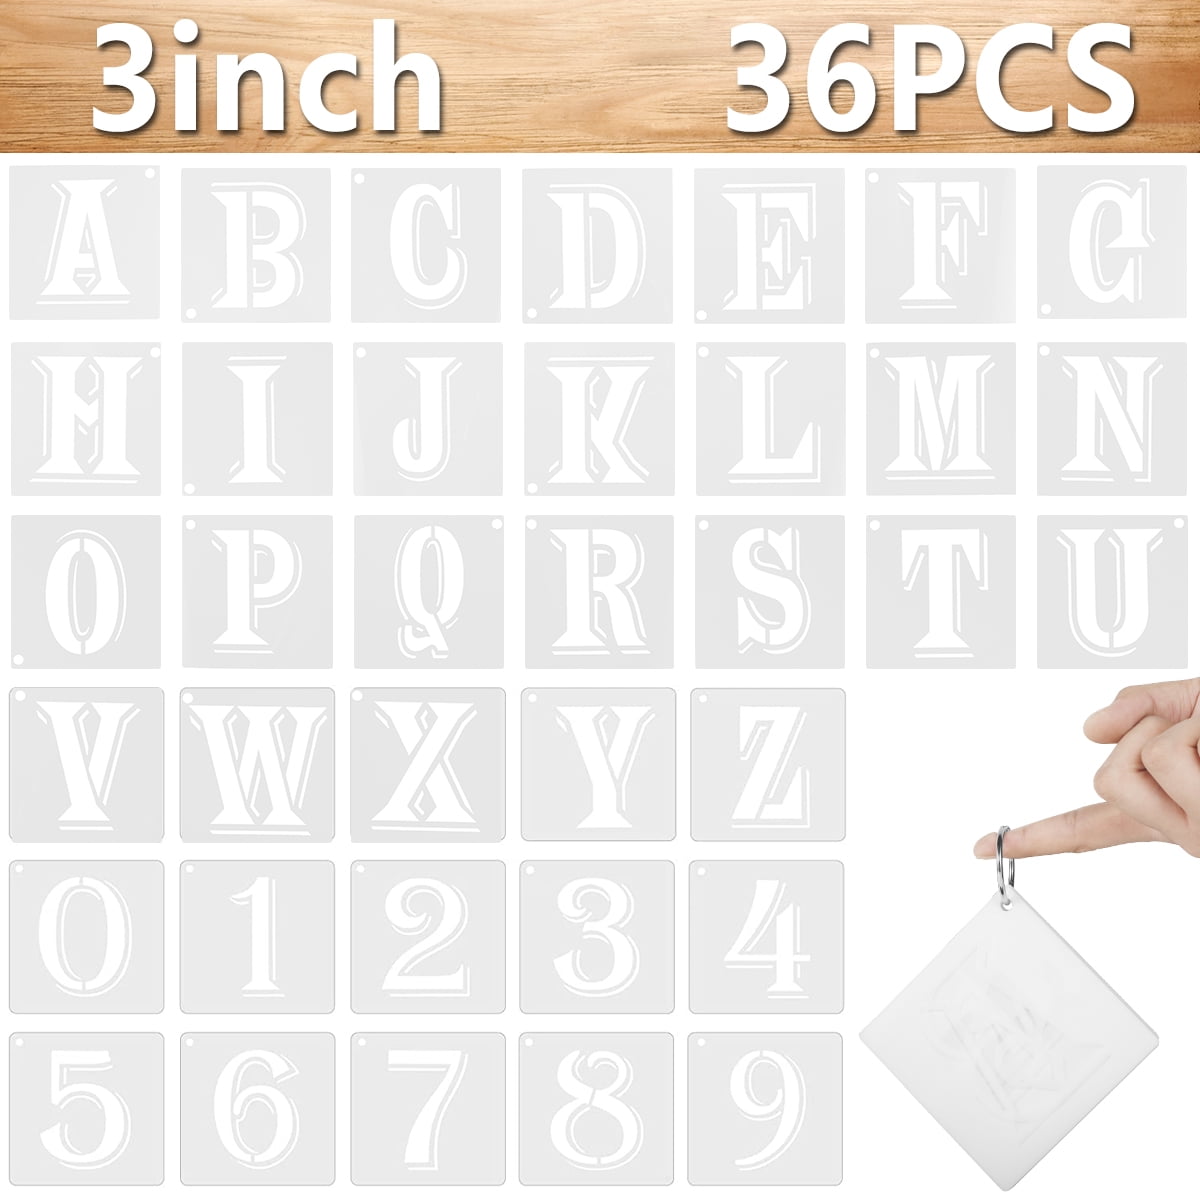 OIAGLH 36pcs Alphabet Letter Stencil for Painting Shop Sign Number Template Translucent Art Project Wall Reusable Learning Home Decor